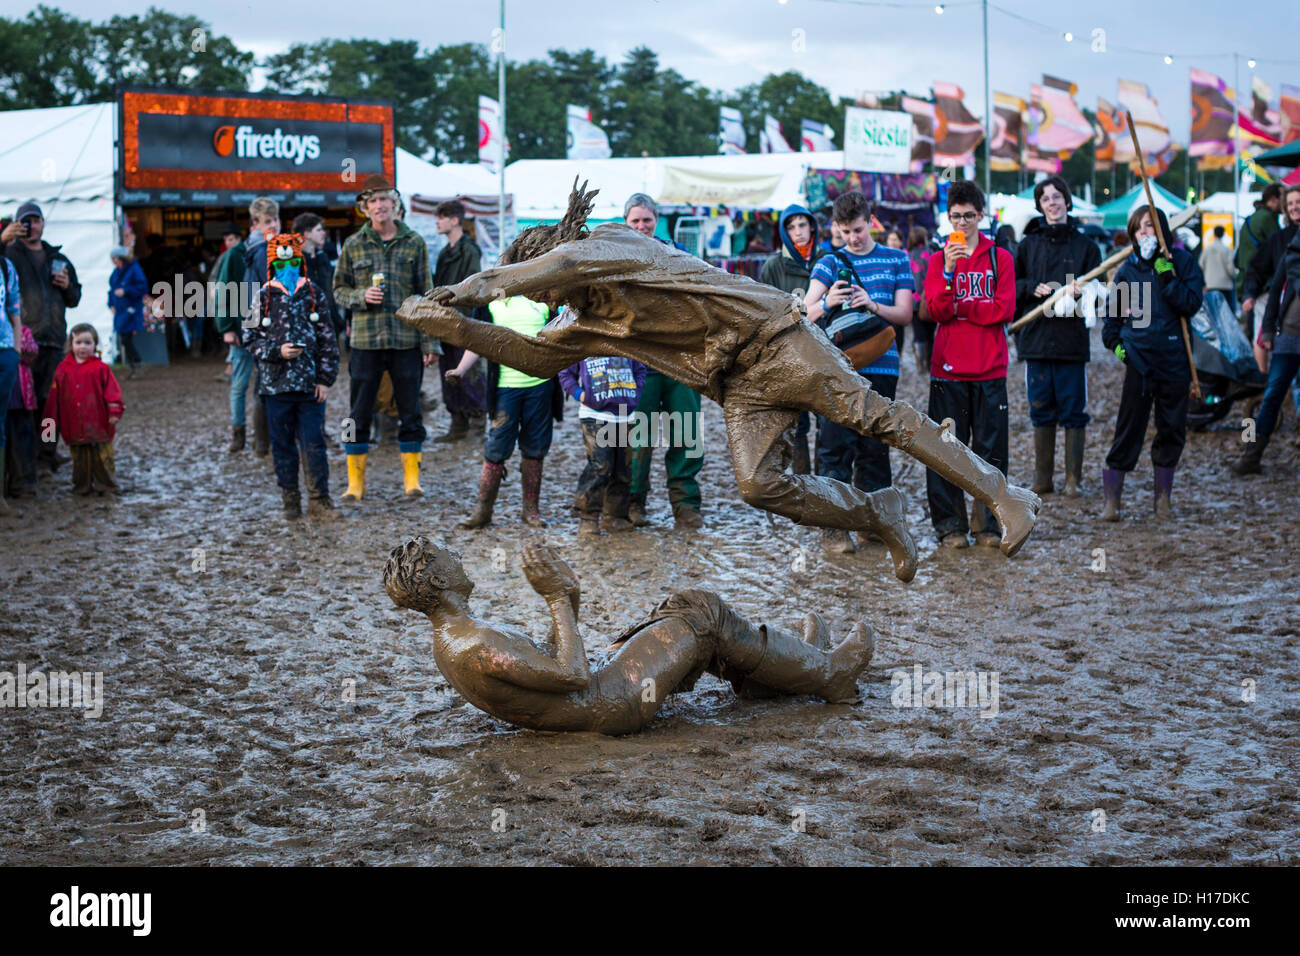 Friends mud wrestling at the 2015 Womad festival, Malmesbury, UK. Stock Photo